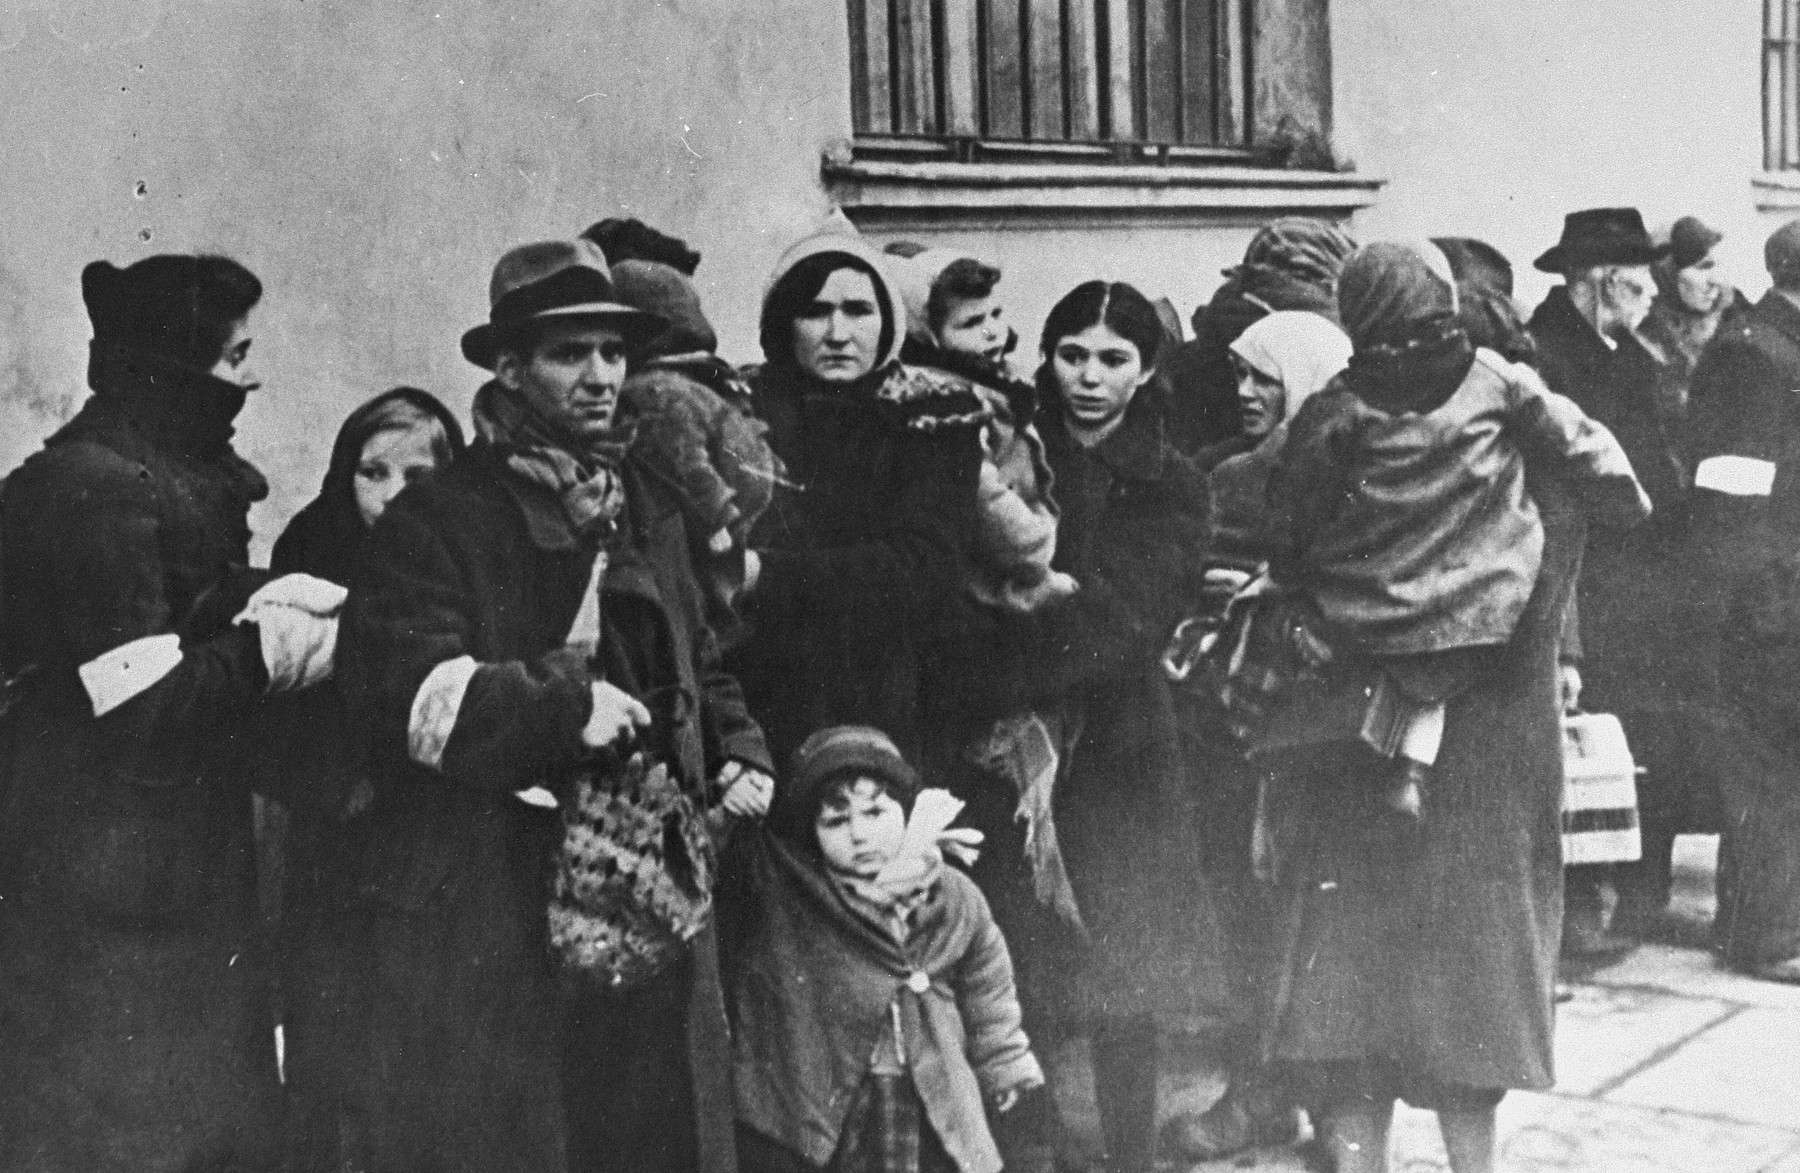 Jews from the Krakow ghetto are assembled for deportation.